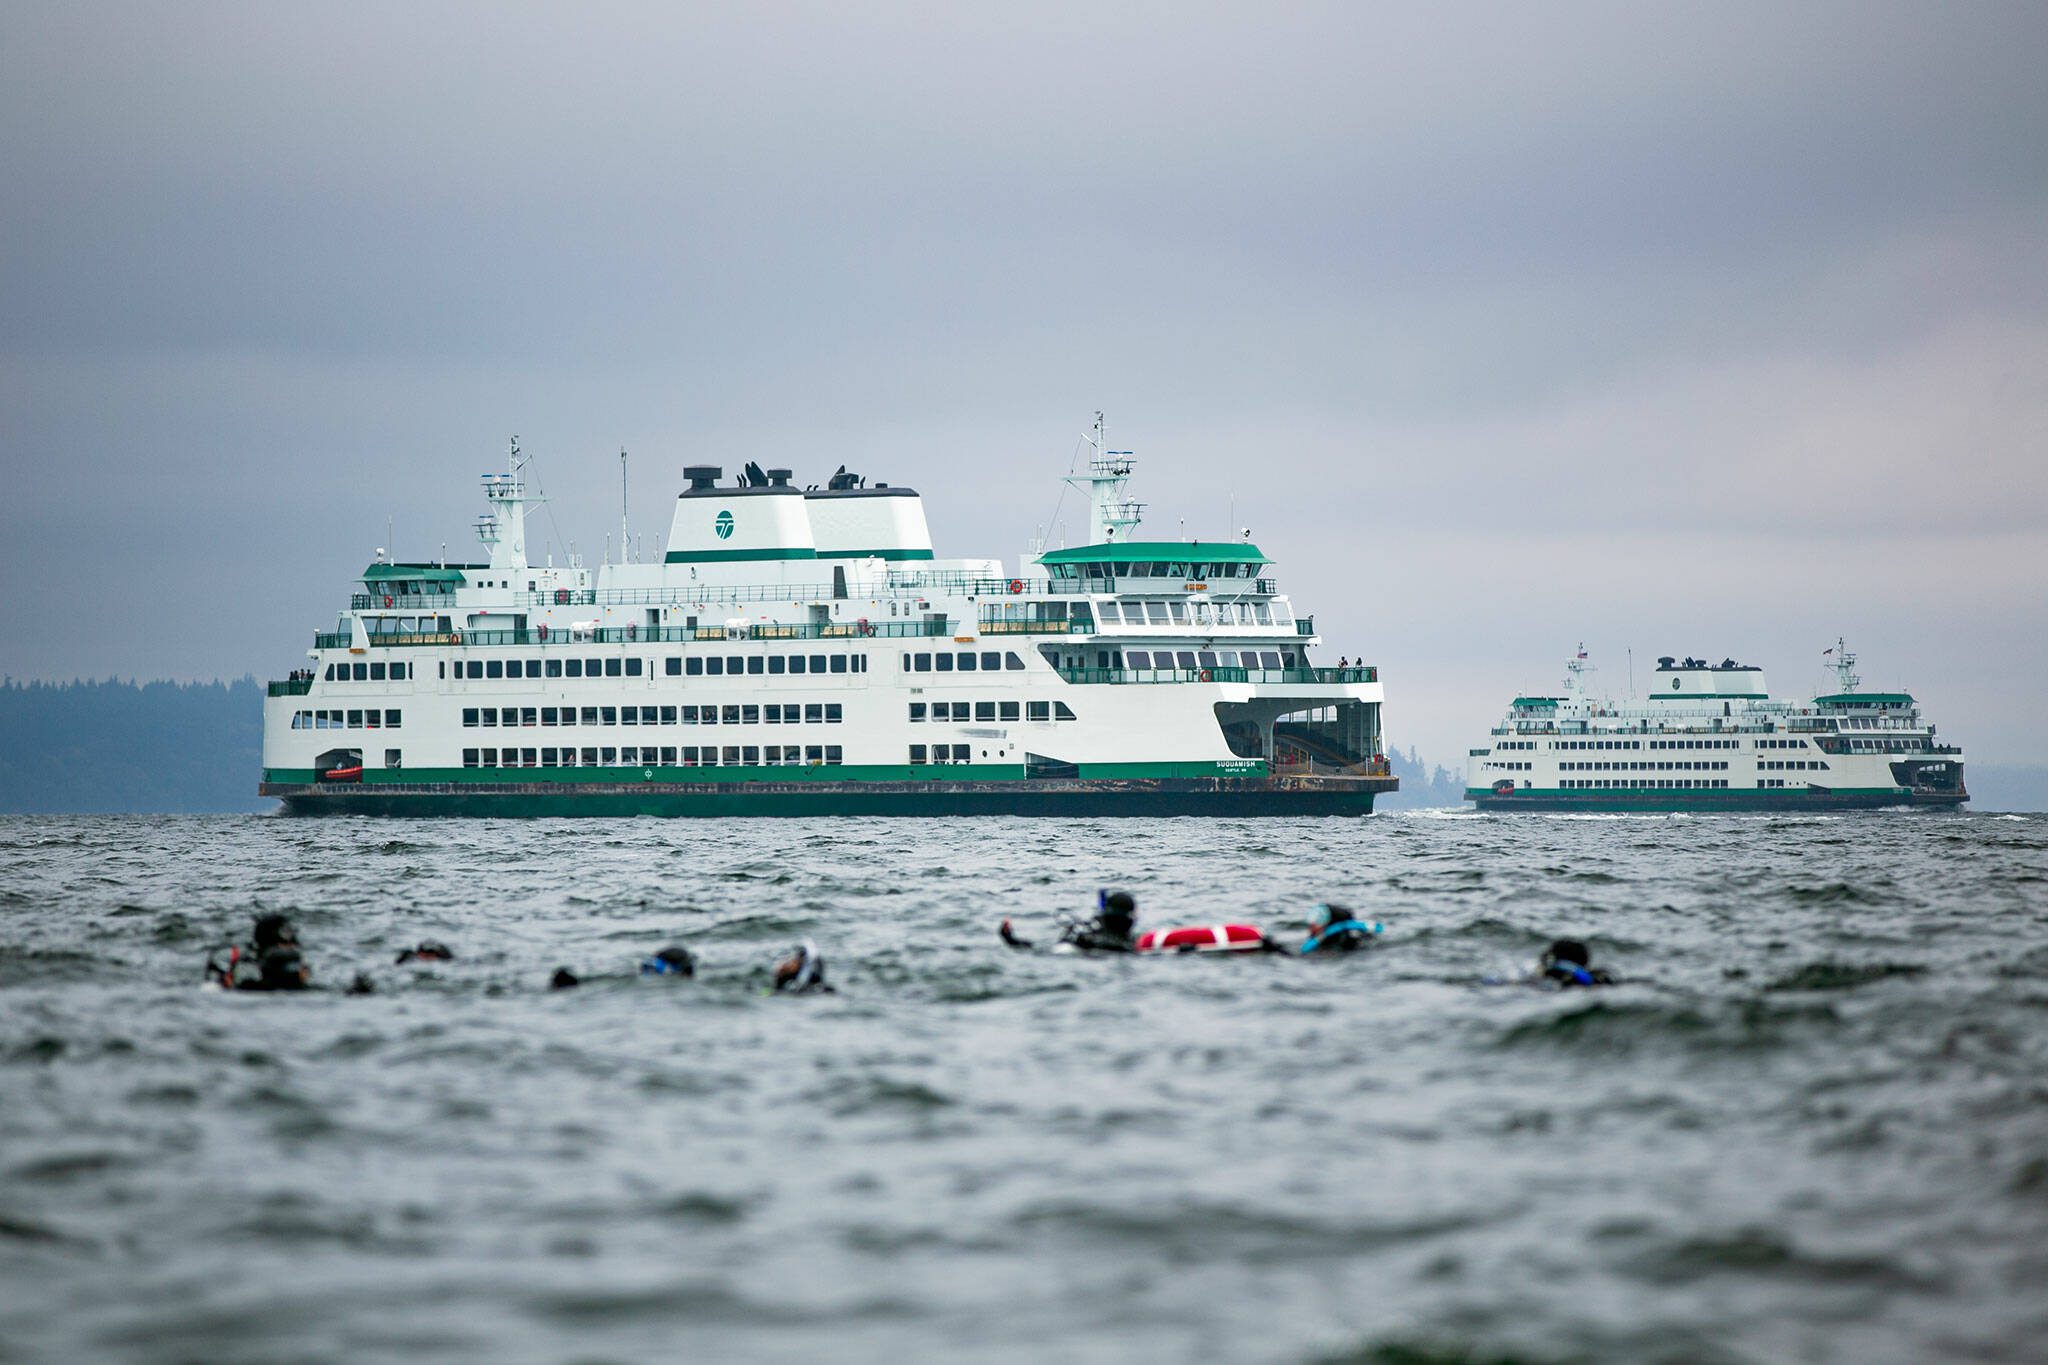 Two Washington State ferries pass along the route between Mukilteo and Clinton as scuba divers swim near the shore Sunday, Oct. 22, 2023, in Mukilteo, Washington. (Ryan Berry / The Herald)